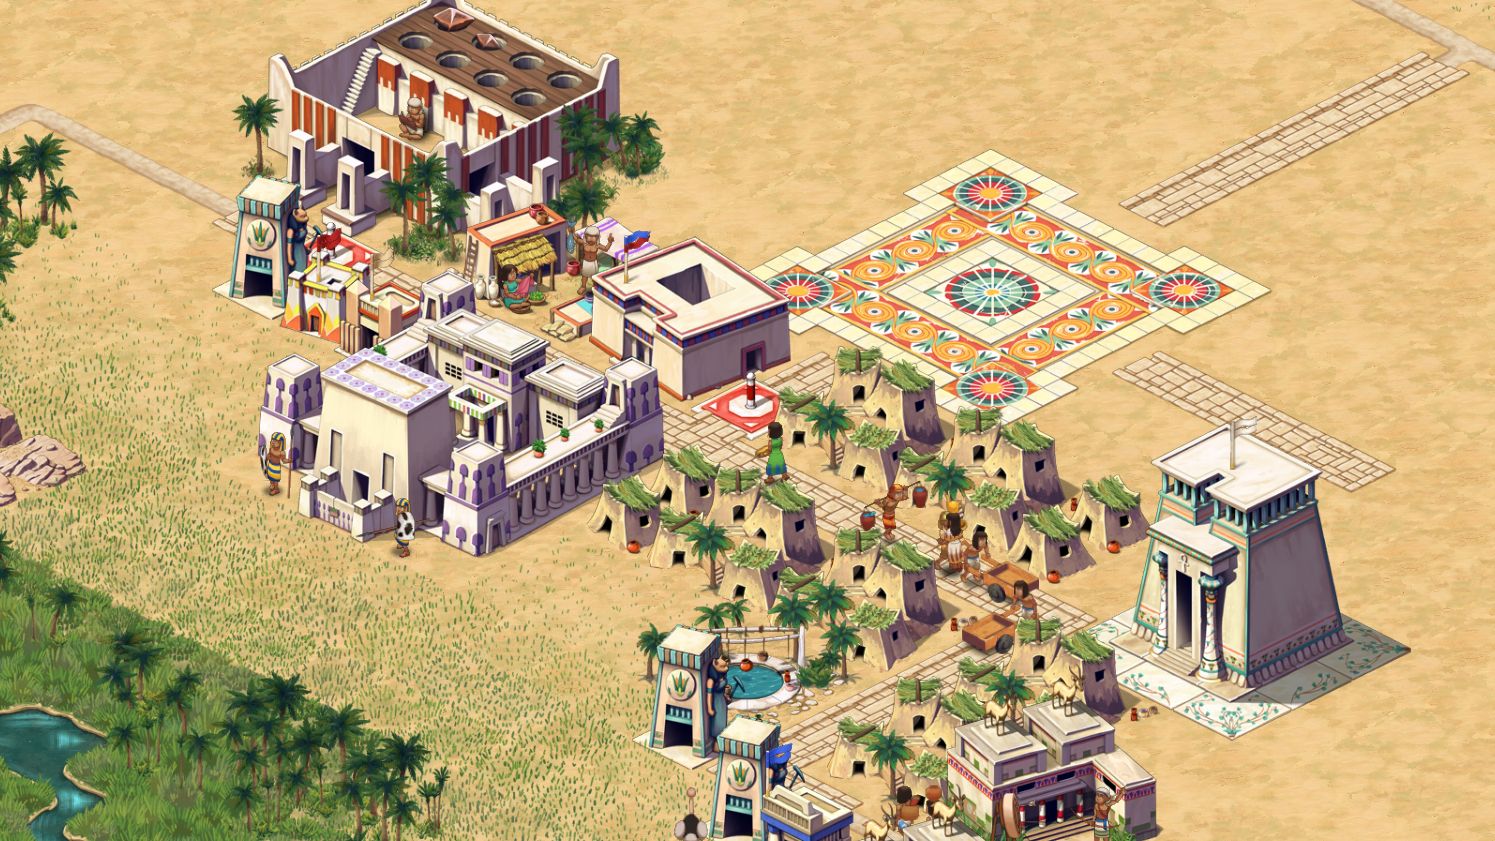 A screenshot from the demo of Pharaoh: A New Era showing a compact and poorly planned city, with a palace and temple to Bast